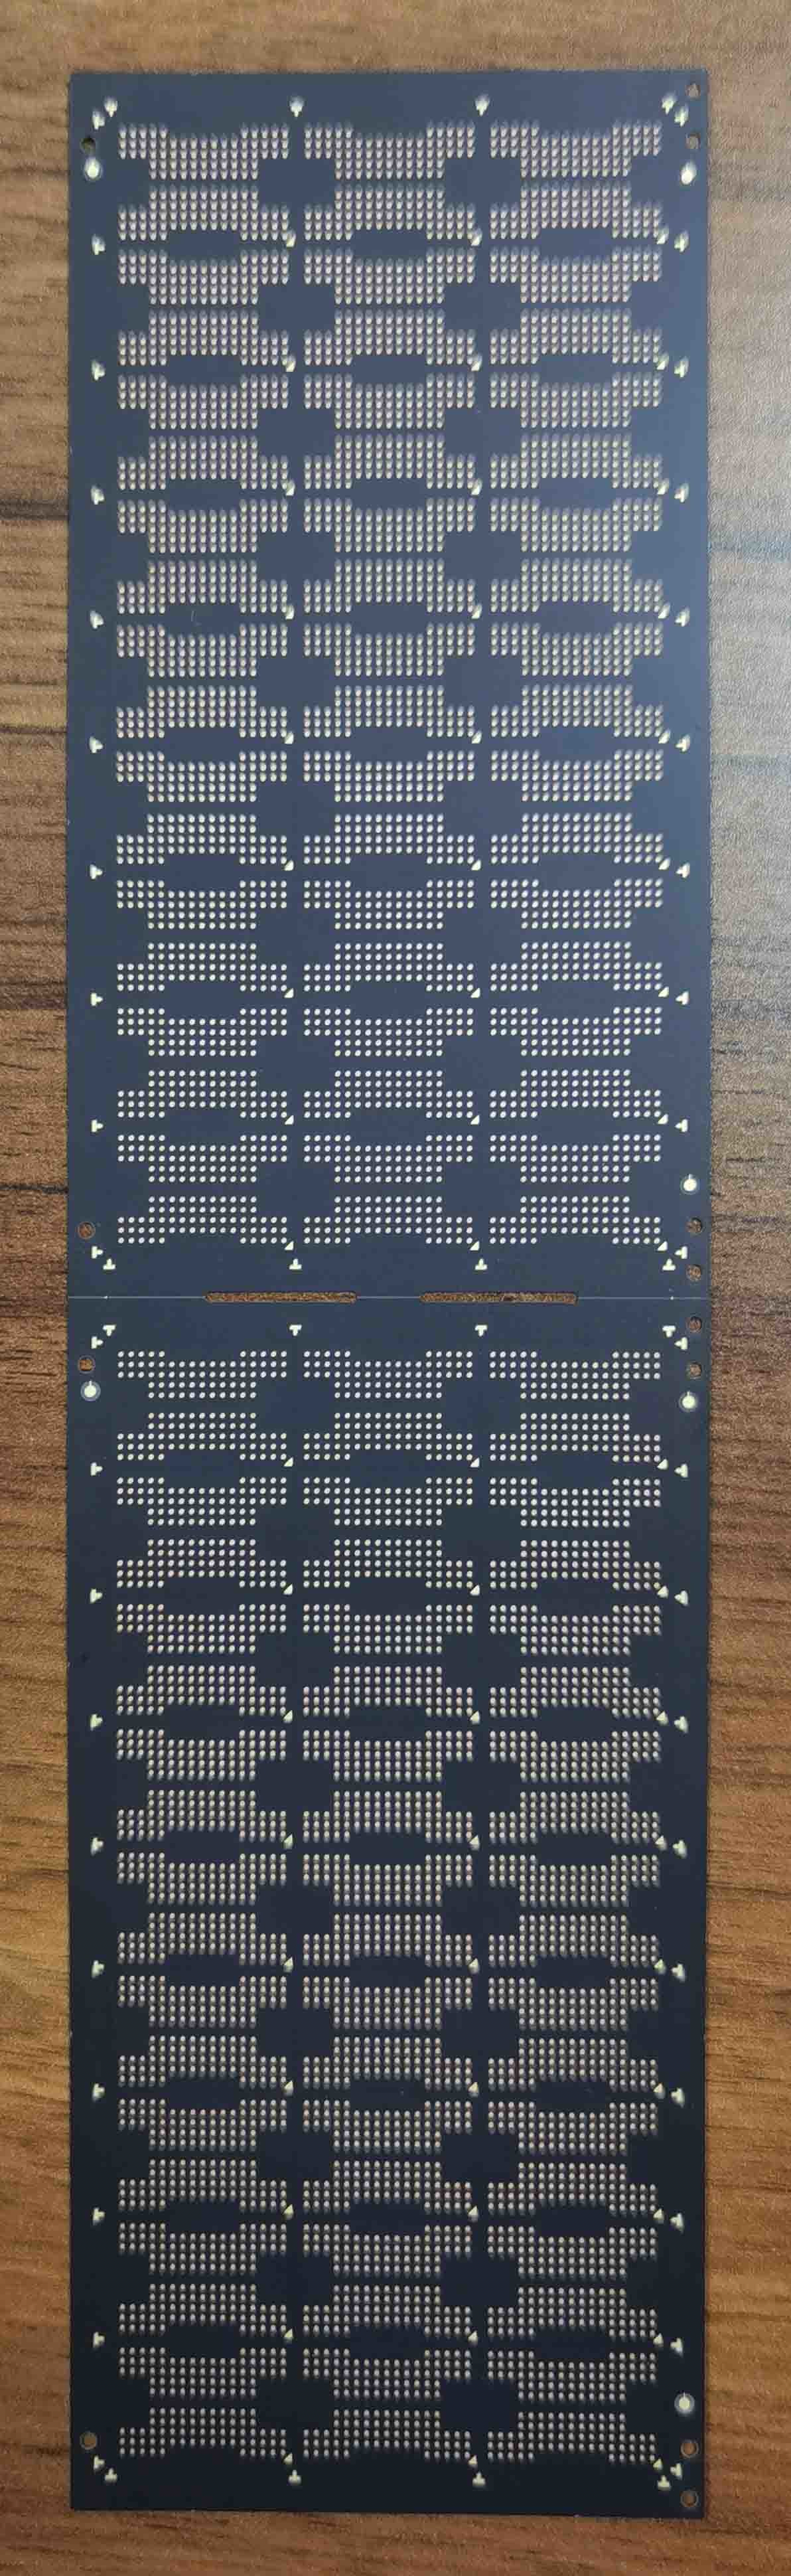 Storage IC Package Substrate Pcb